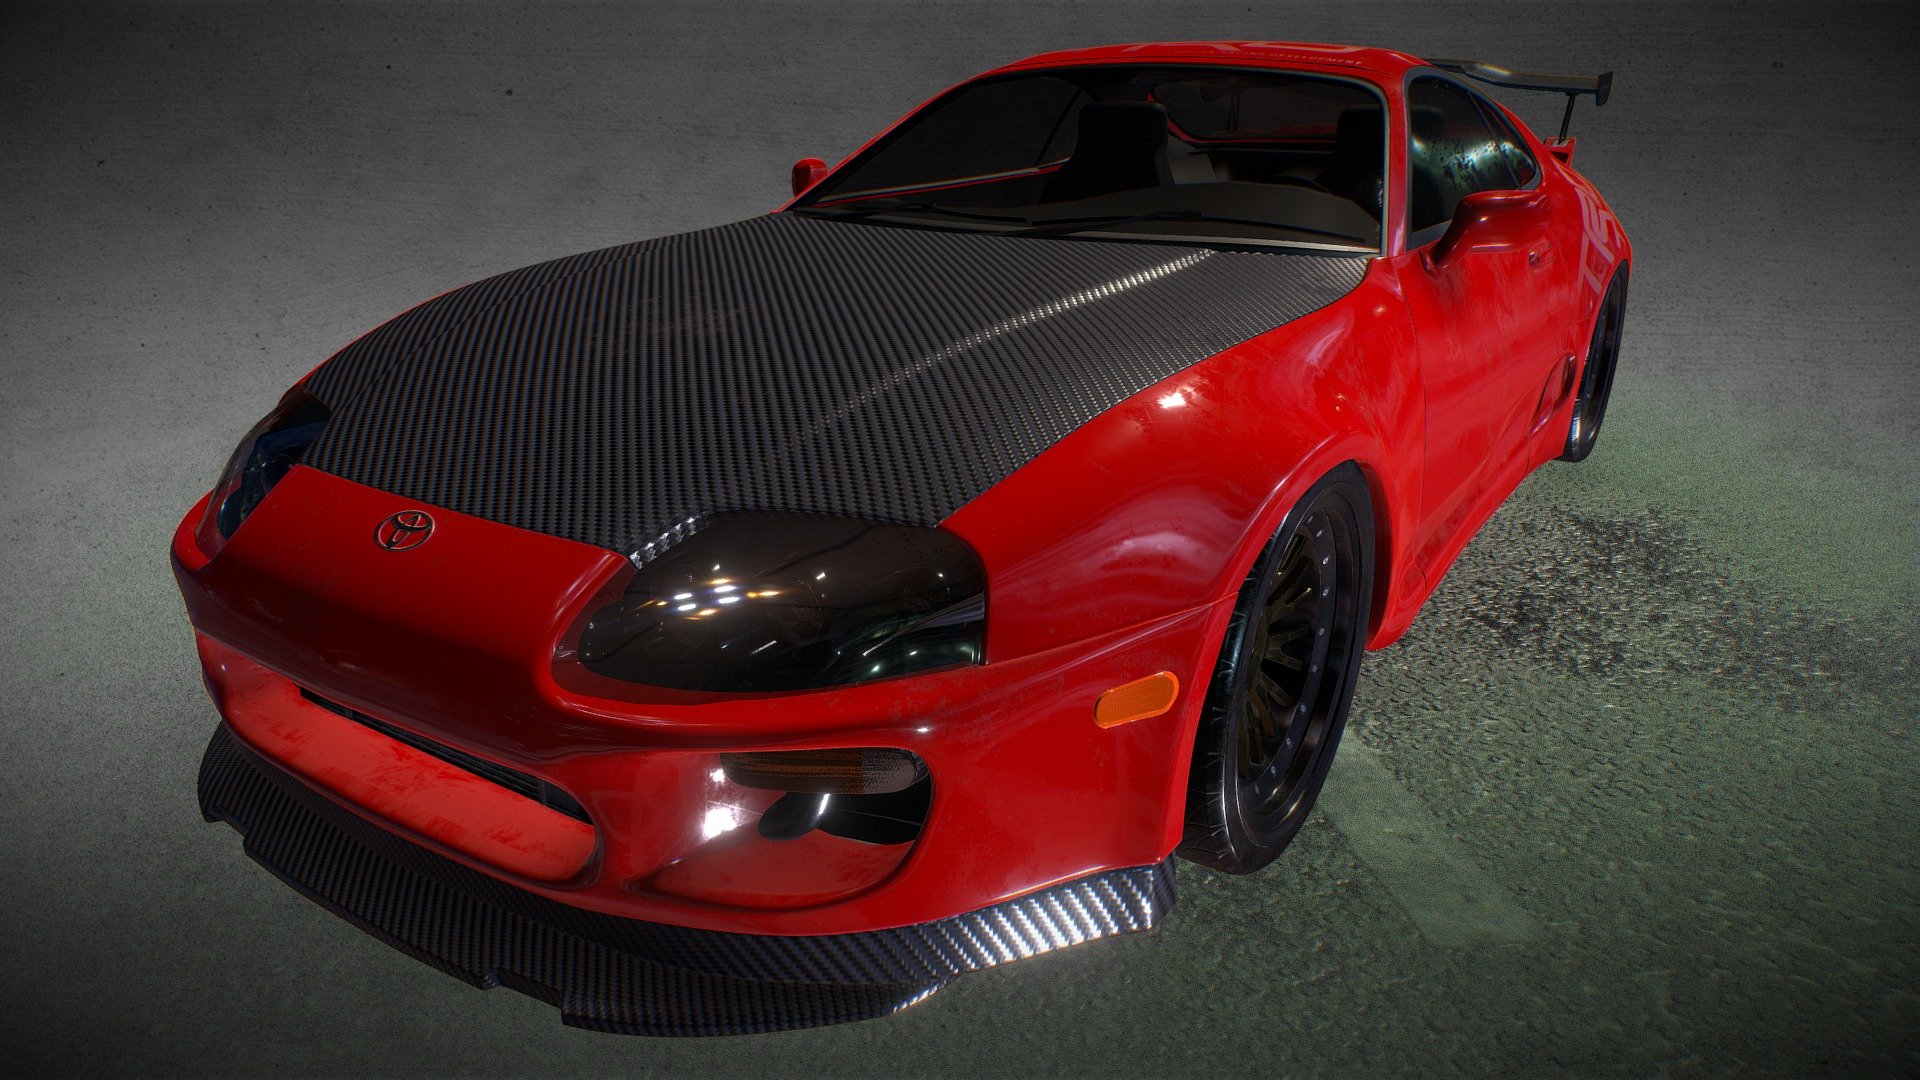 A game ready rendition of one of my favorite cars of all time, the TOYOTA SUPRA 3d model